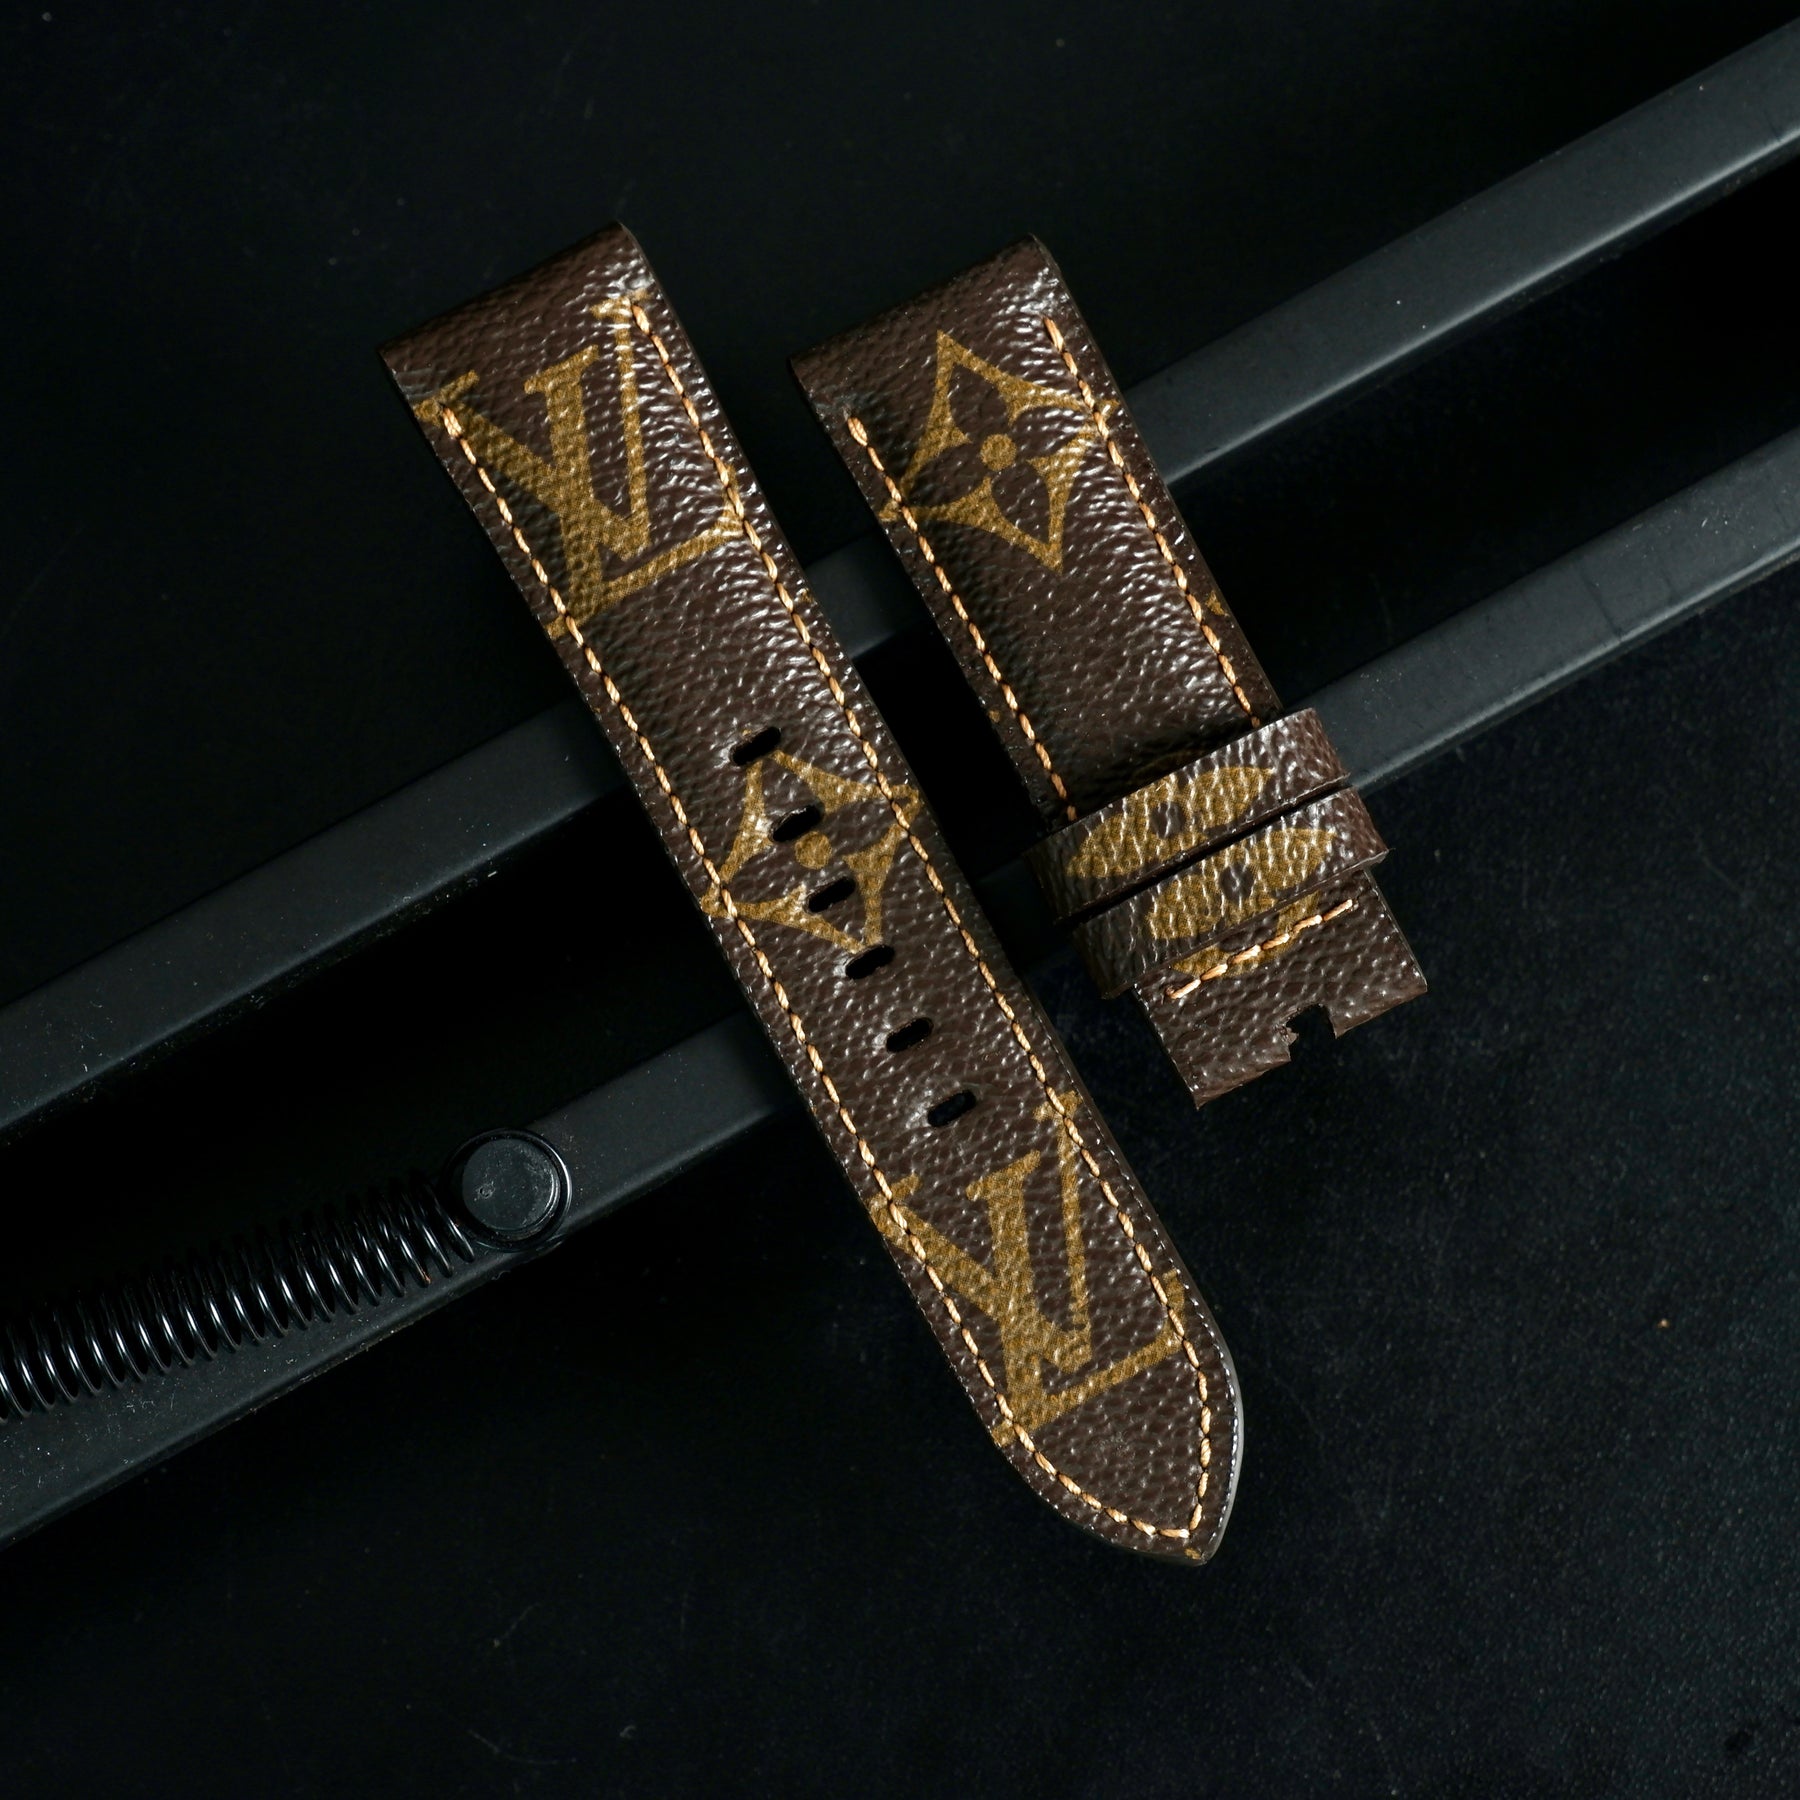 Louis Vuitton Straps for any watches (Panerai, Rolex, IWC, Omega, AP, etc).  Shipped worldwide.